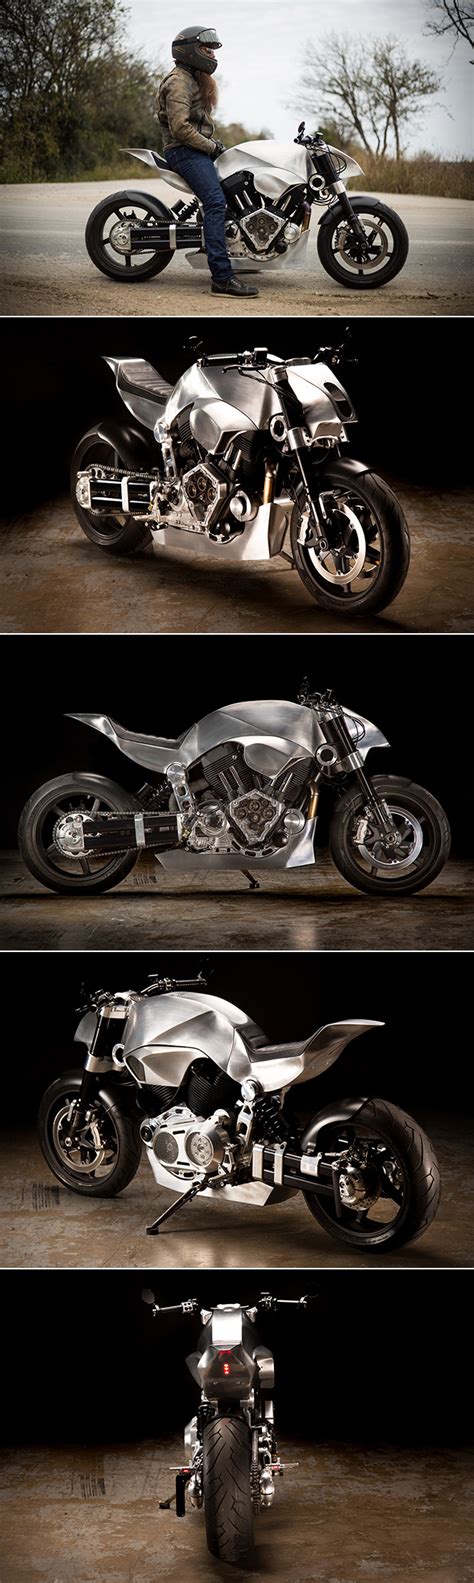 Confederate Hellcat Revival 140 Motorcycle Looks To Be Straight From A